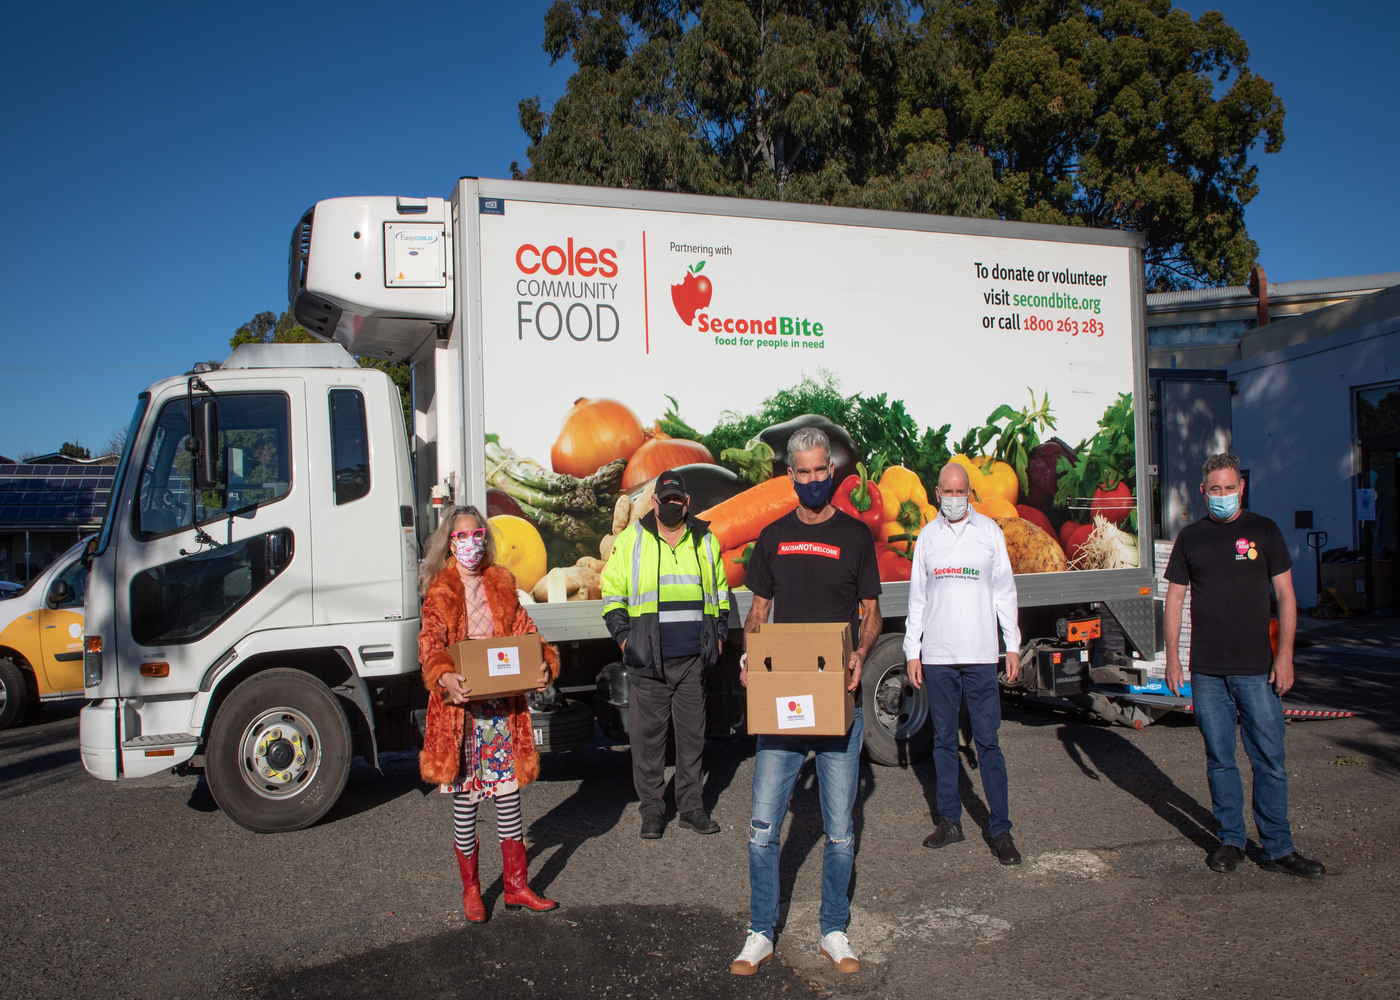 SecondBite, City of Sydney and Coles have banded together to provide vital food relief to vulnerable Sydney residents